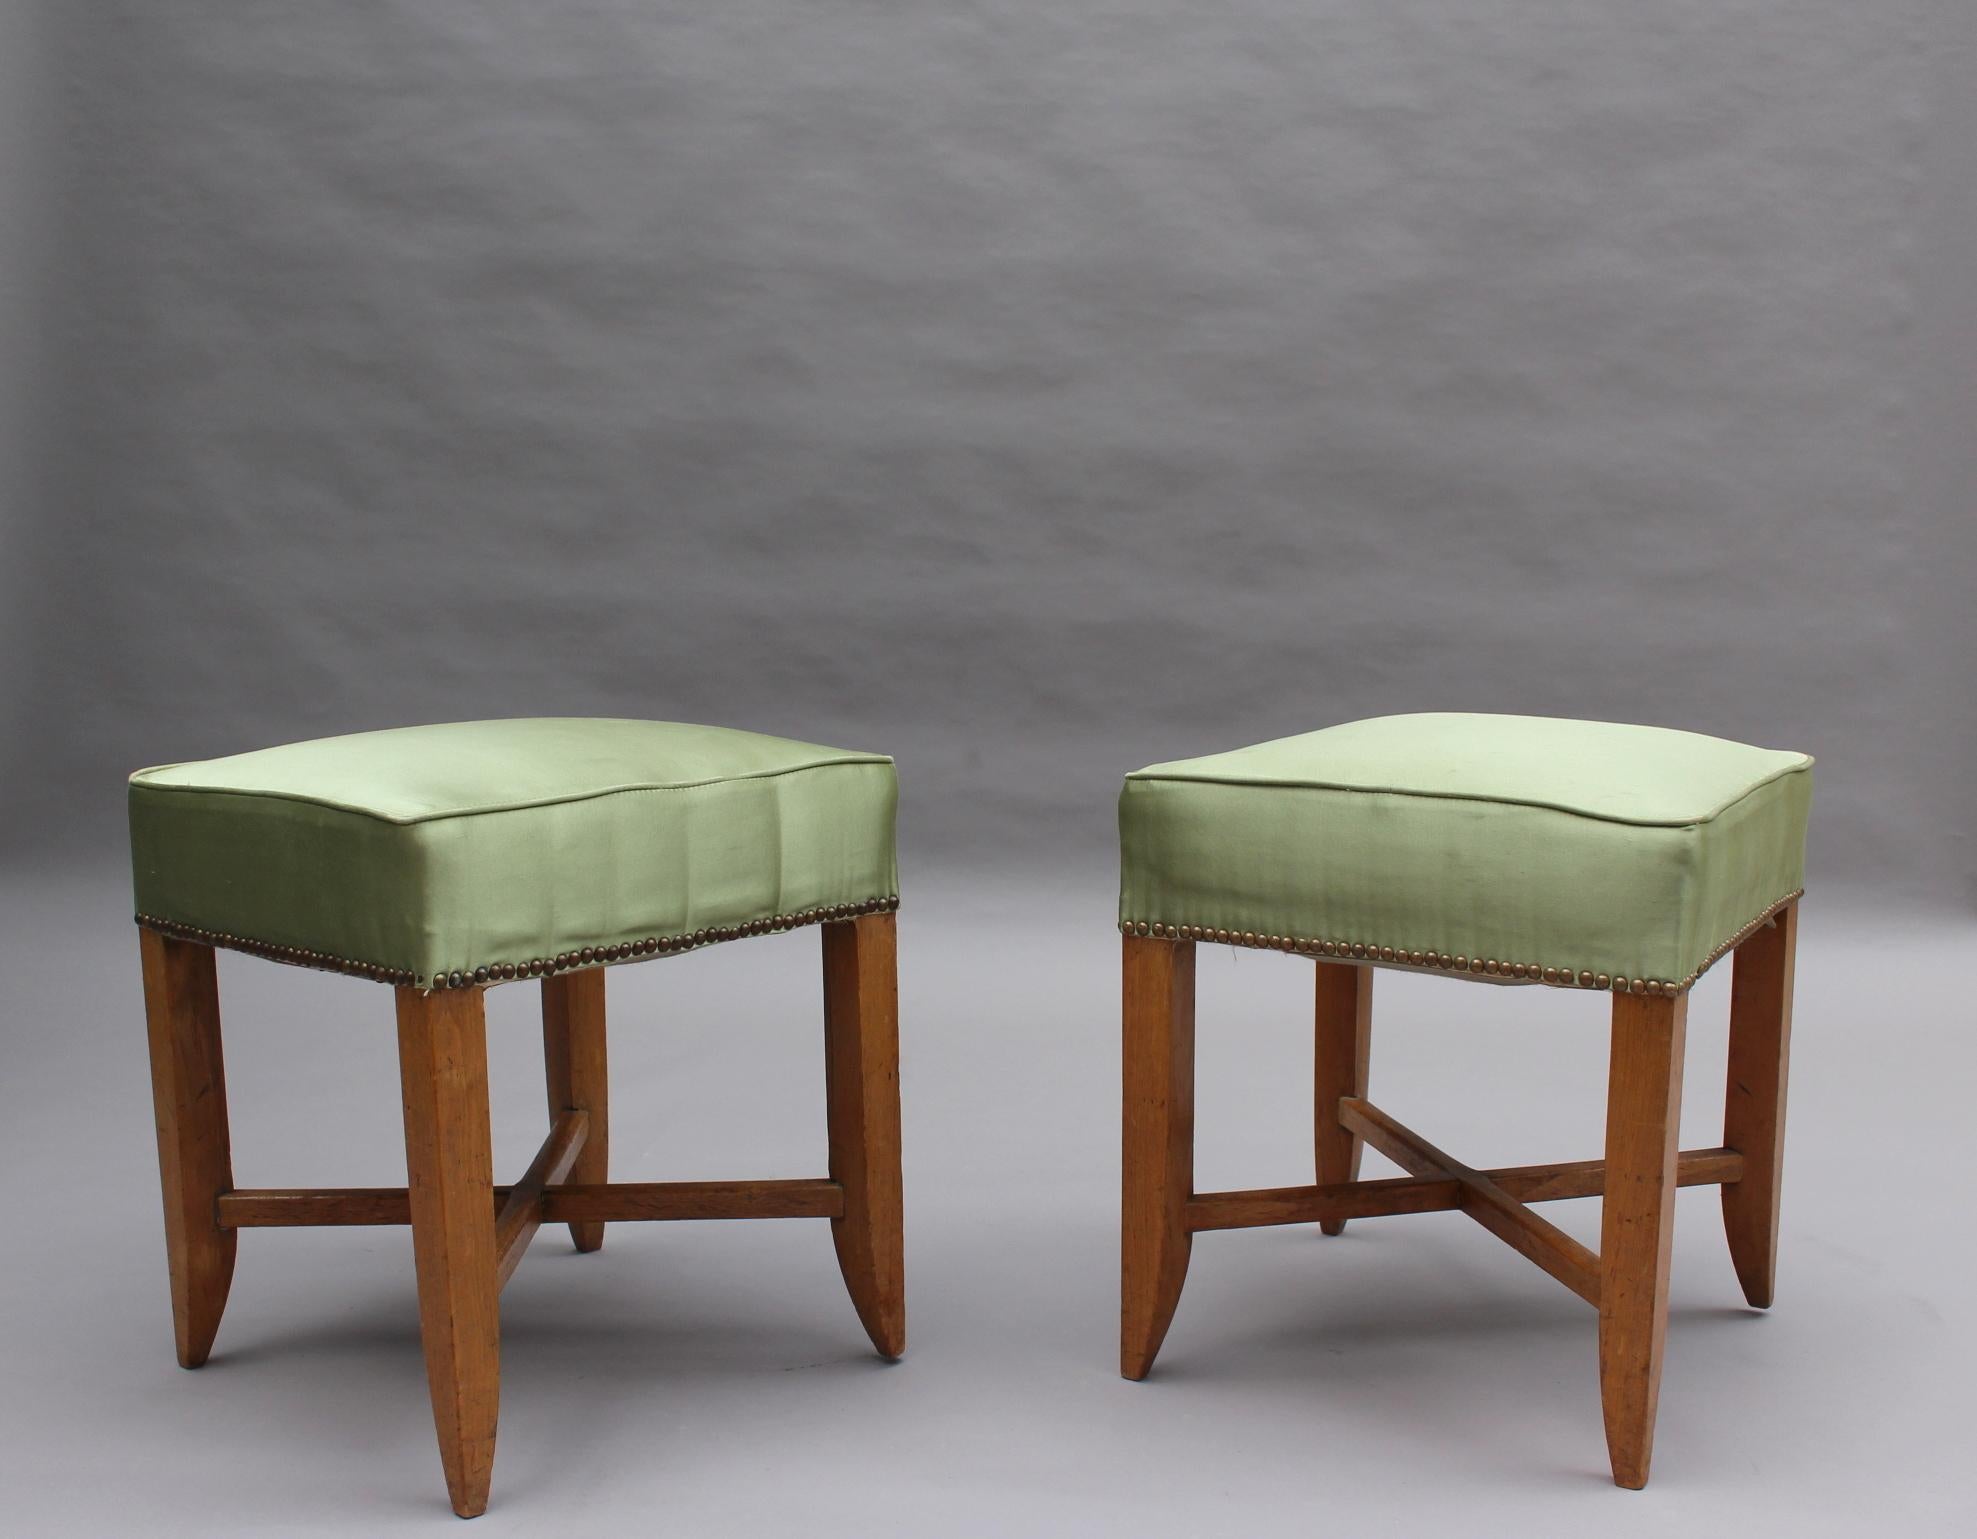 A pair of fine French Art Deco 4-legged beech stools.